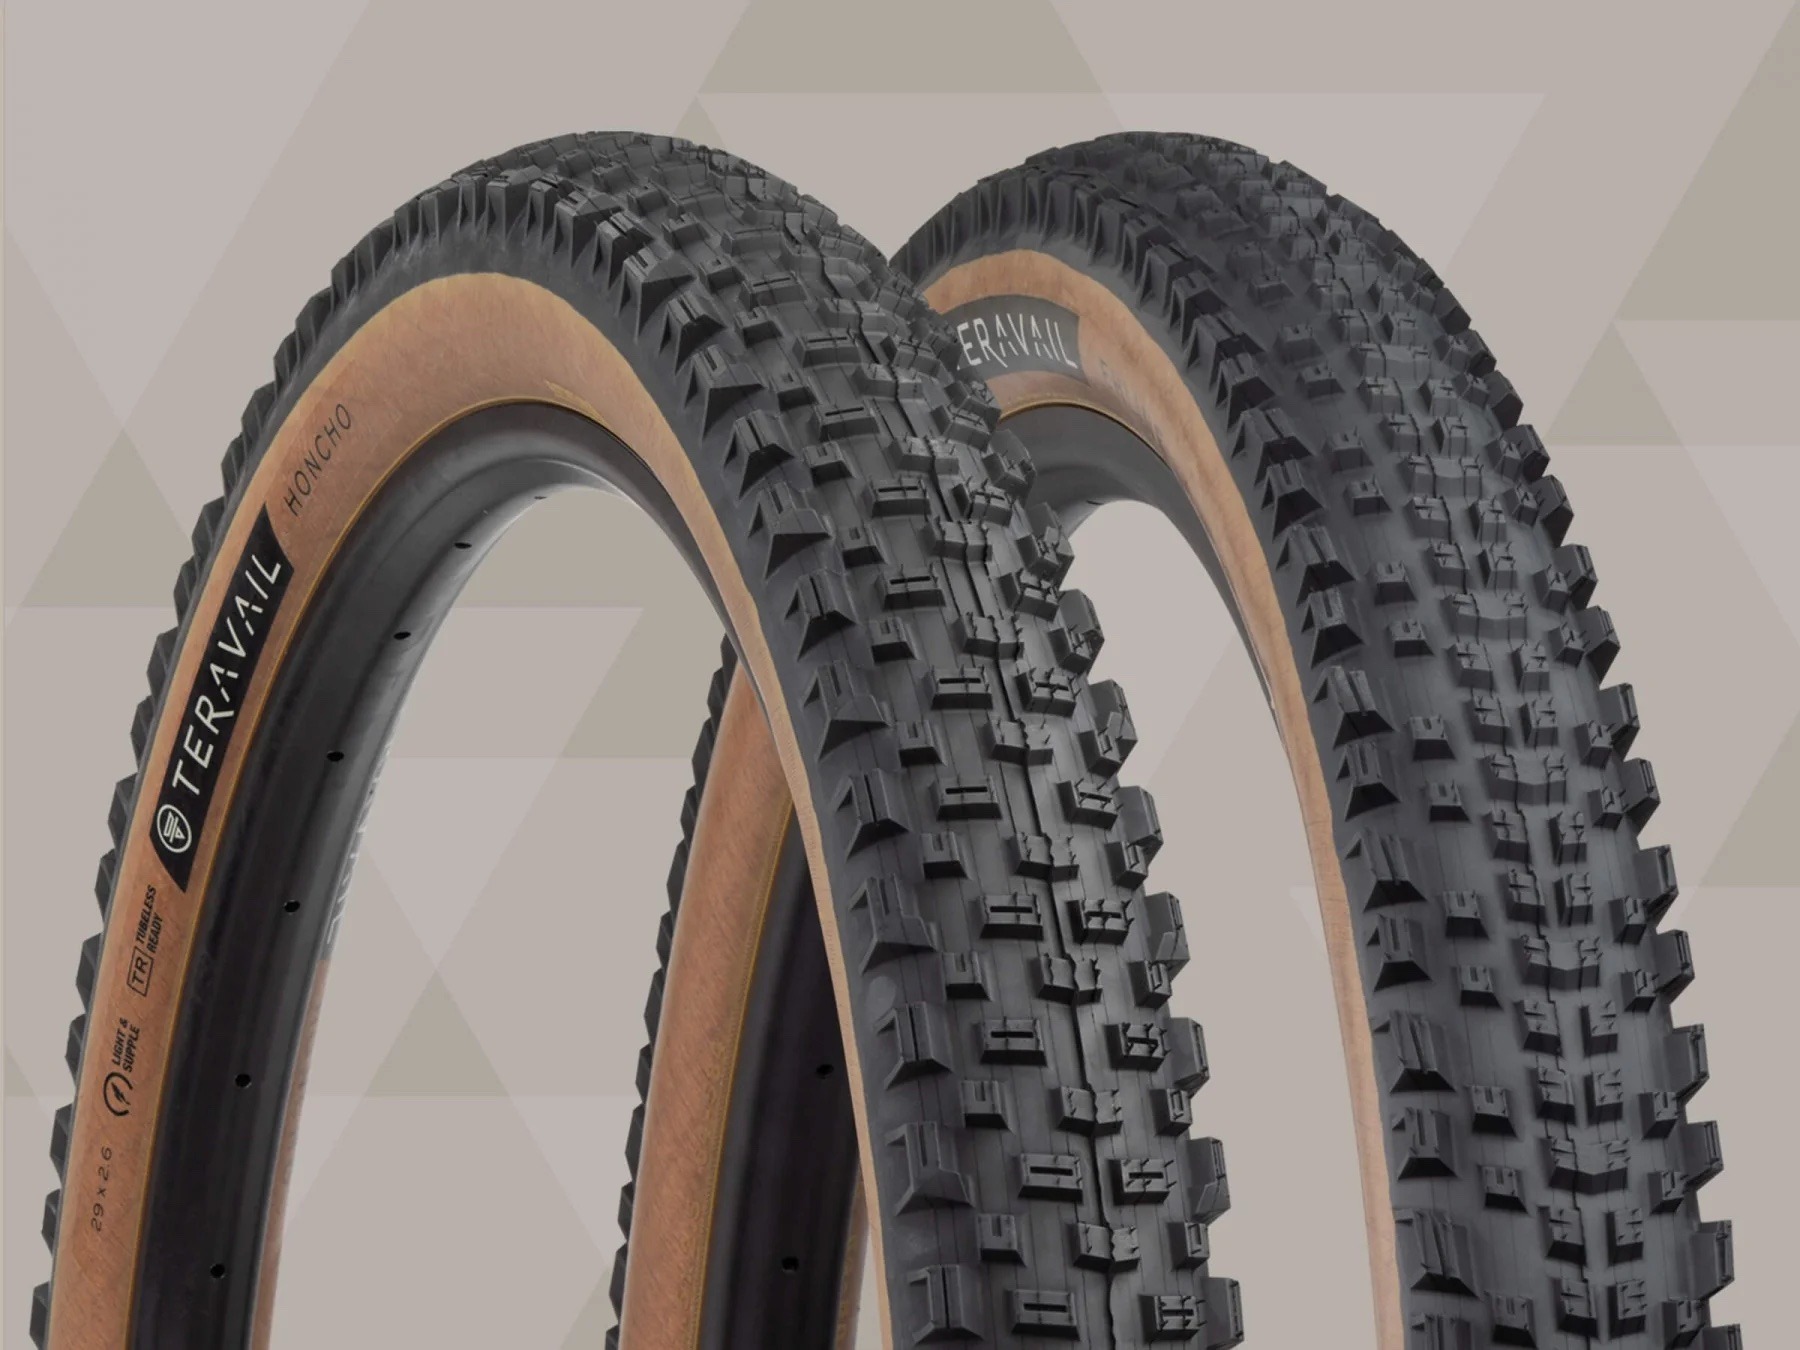 Teravail Honcho and Ehline tires on a tan background with tread detail visible